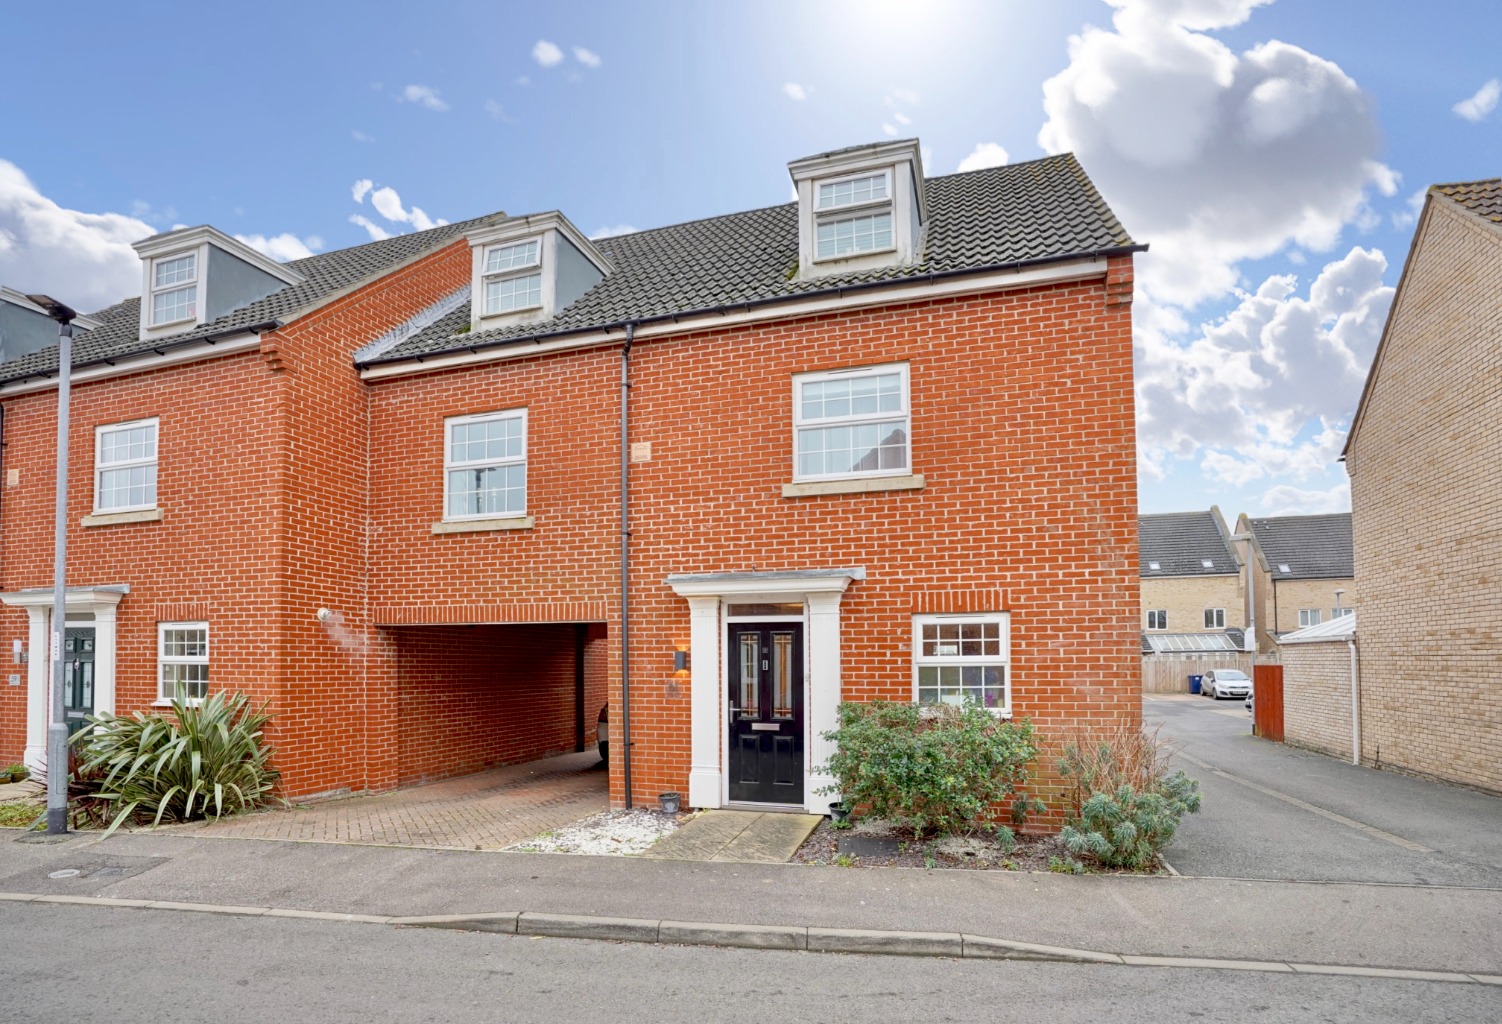 This semi-detached property offers an entrance hall, cloakroom, and a very spacious and open-plan kitchen/dining room with French doors out to the rear garden - making it a very bright and airy space. On the first floor, you will find a sizable family lounge and two double bedrooms...